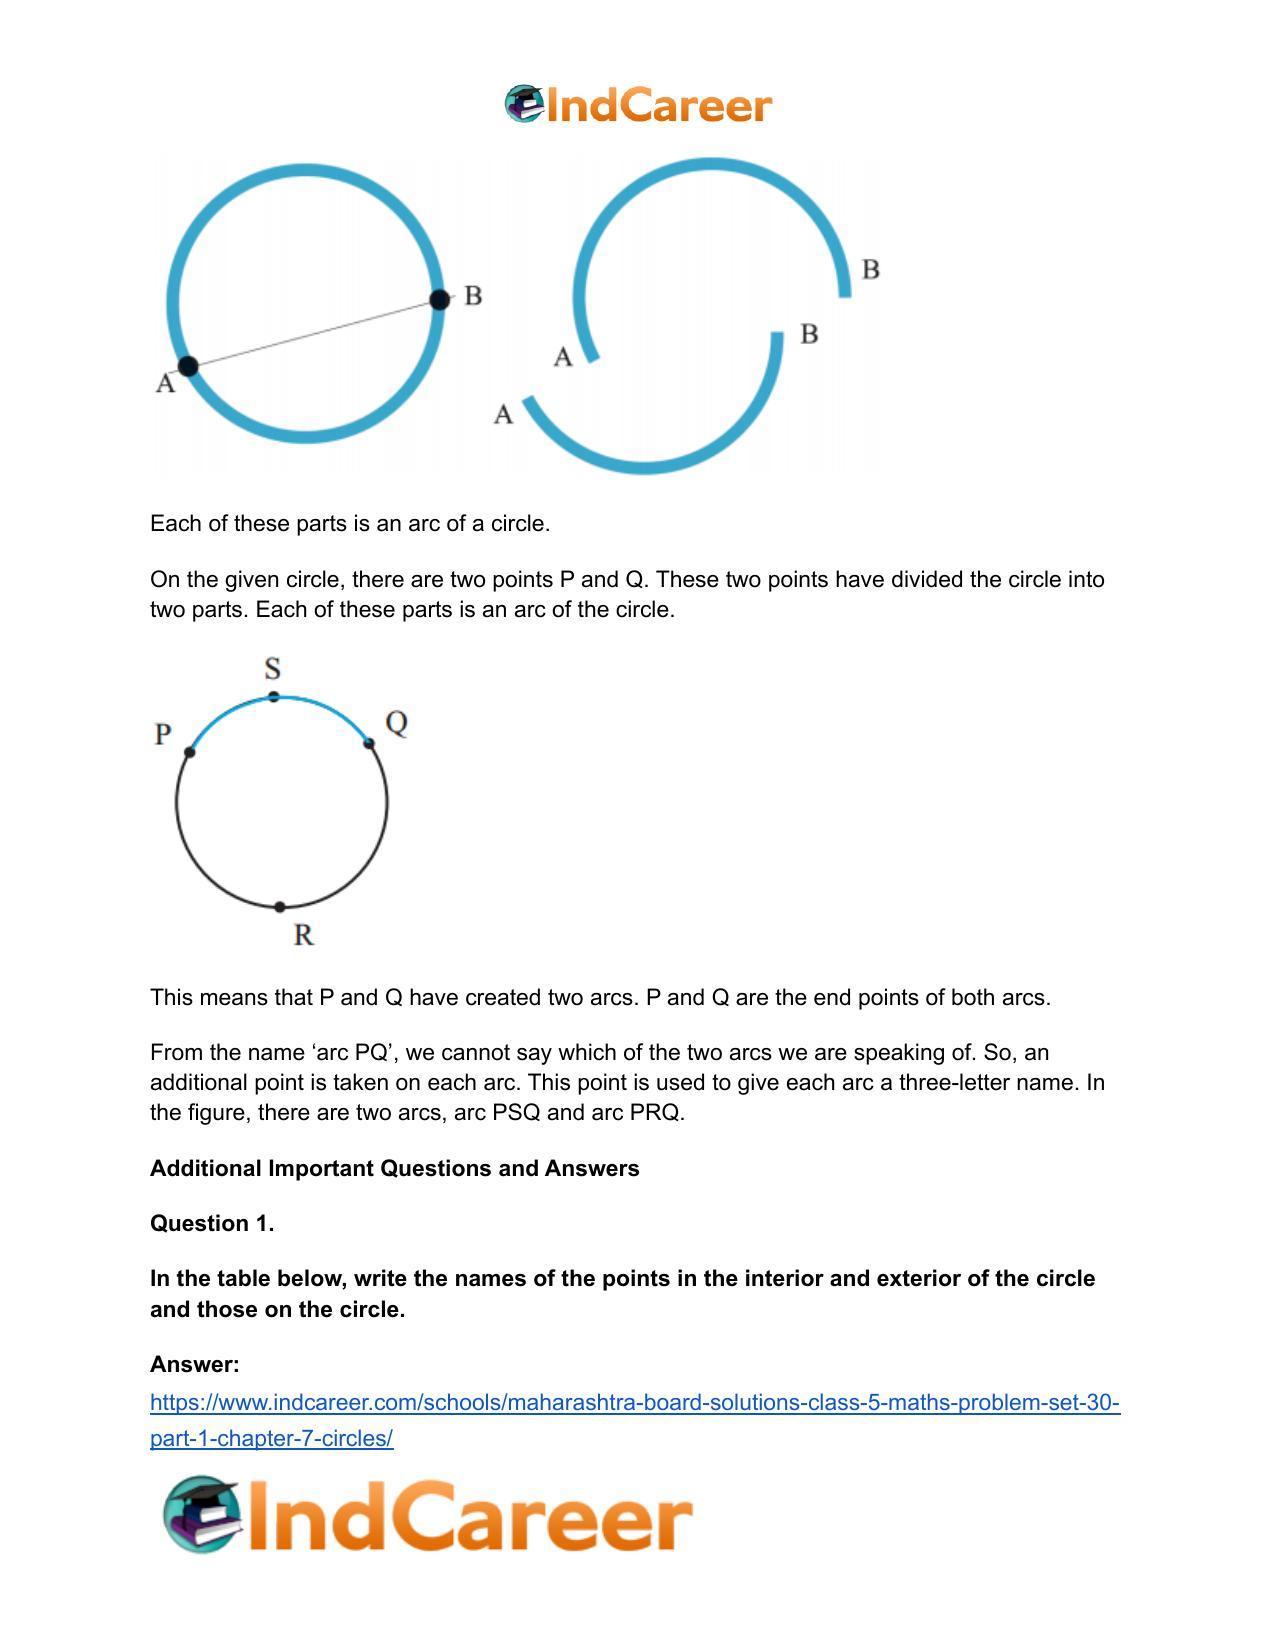 Maharashtra Board Solutions Class 5-Maths (Problem Set 30) - Part 1: Chapter 7- Circles - Page 4